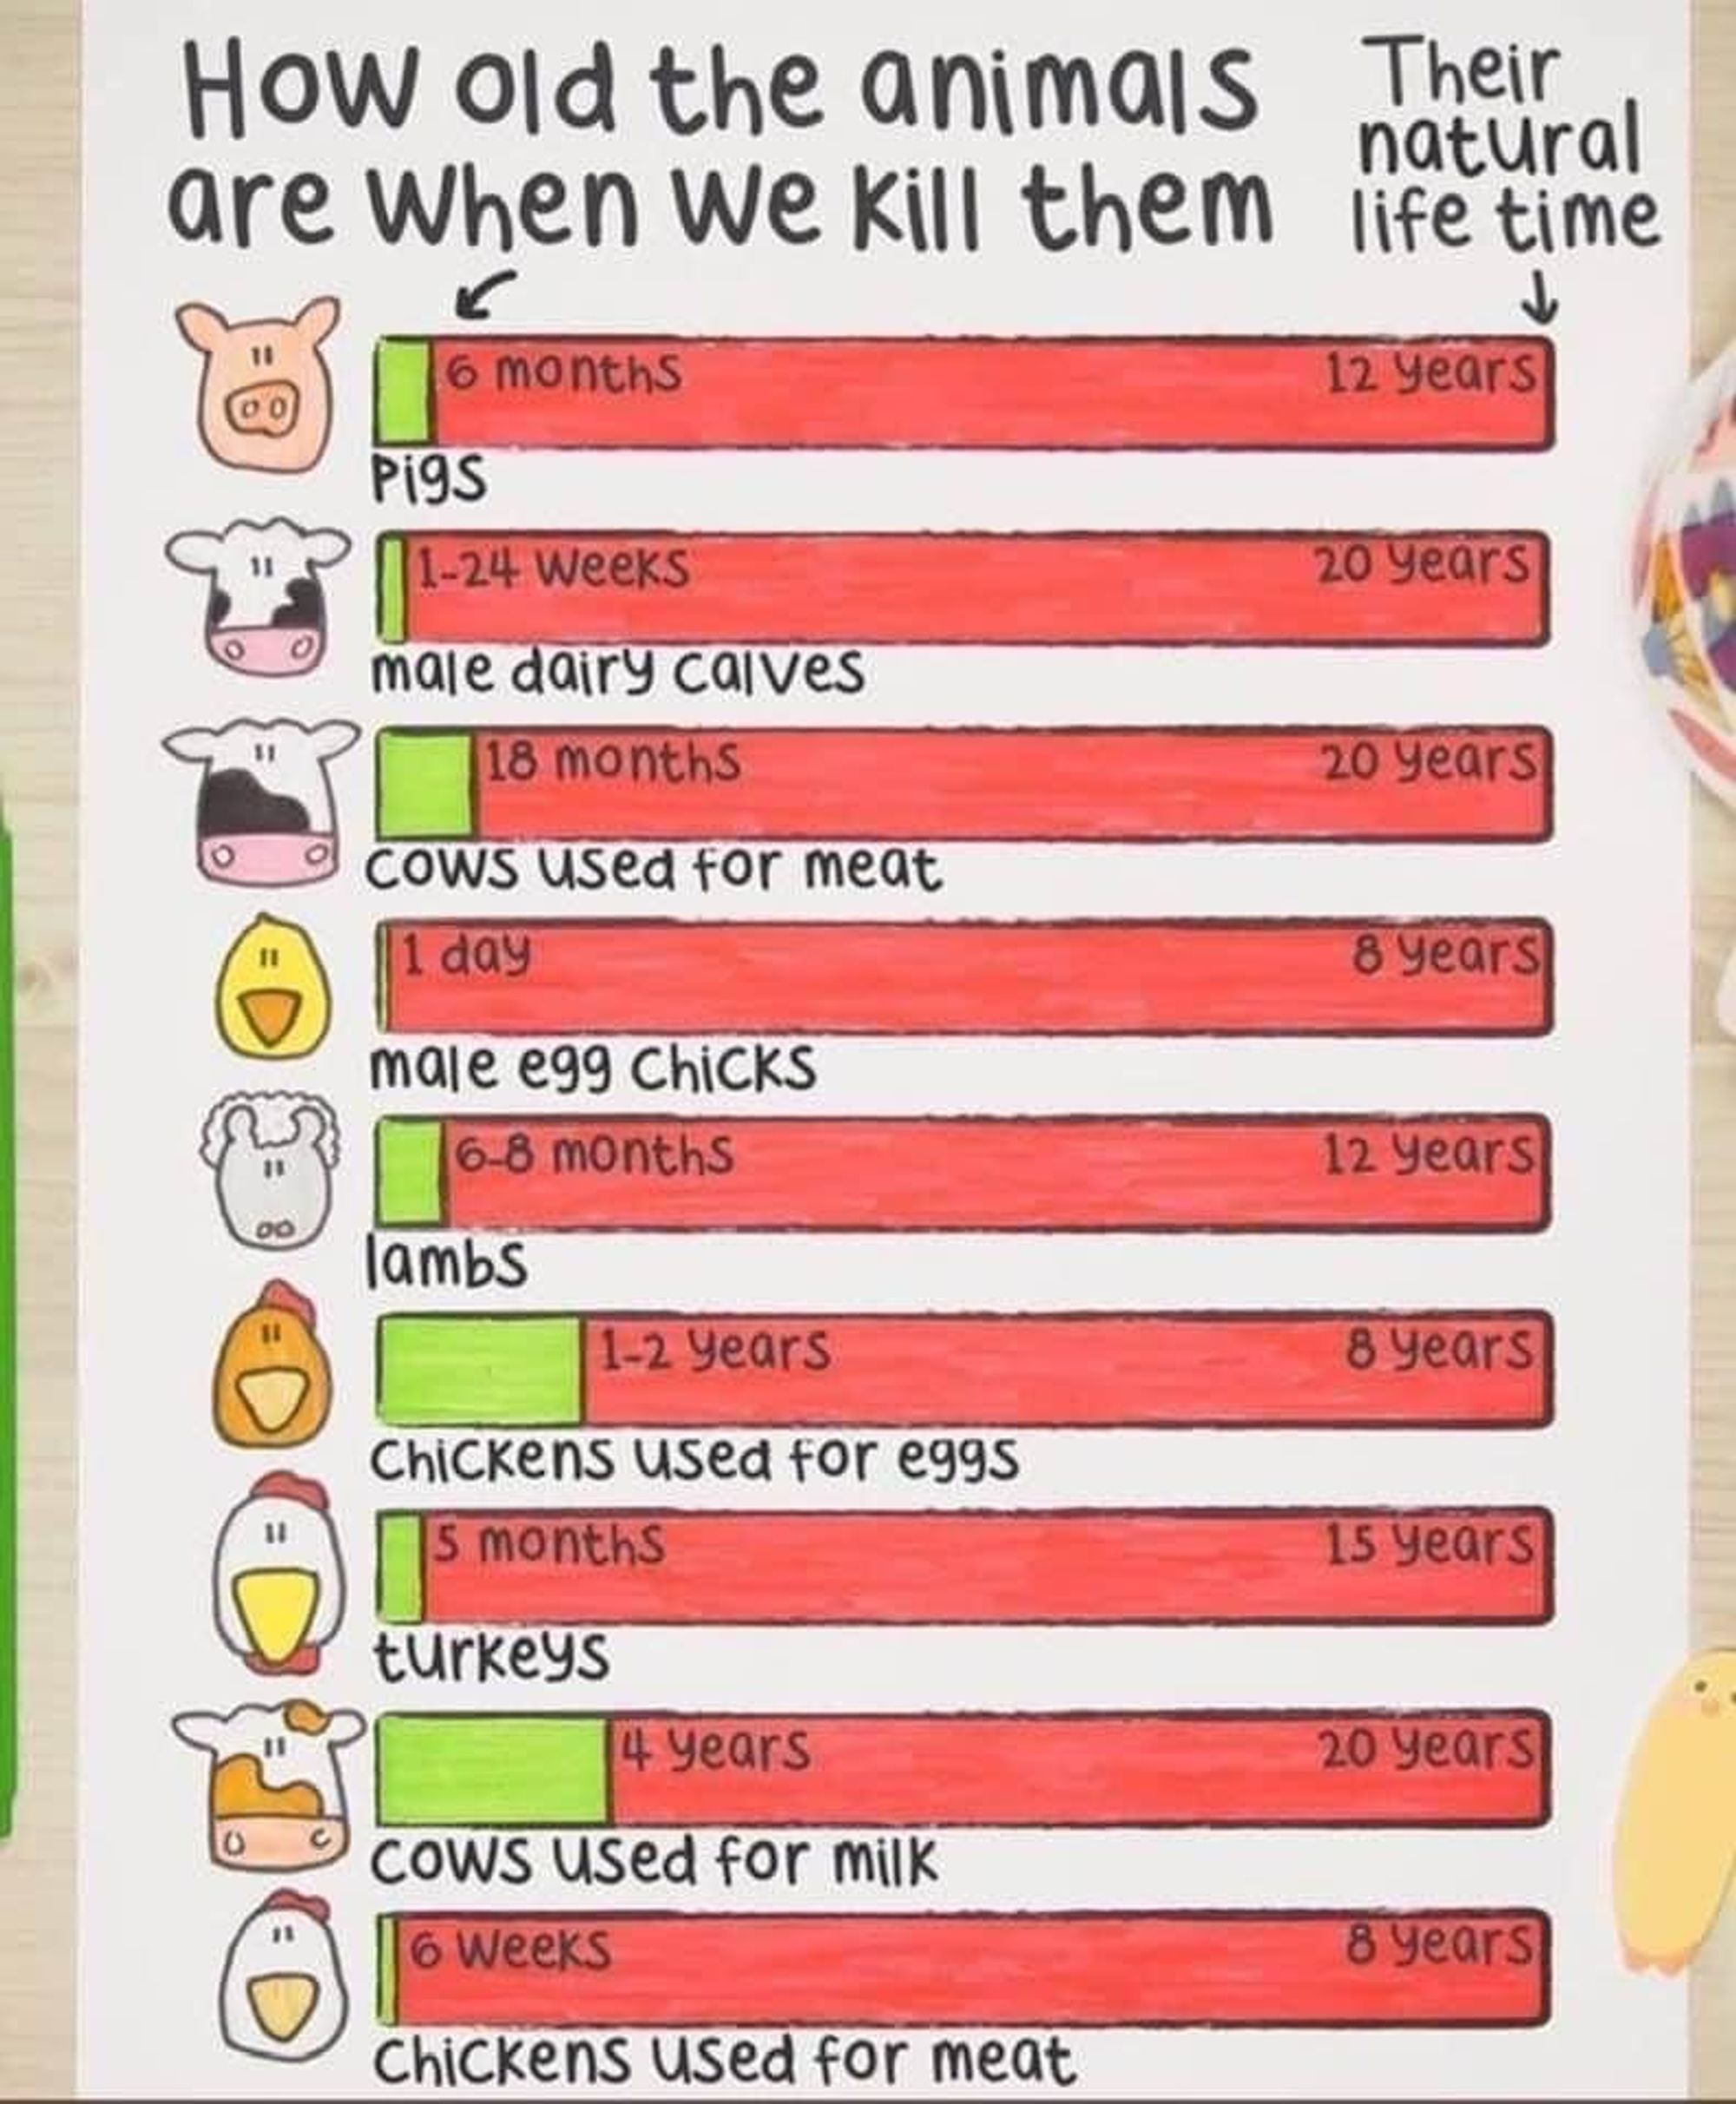 How old are animals when killed